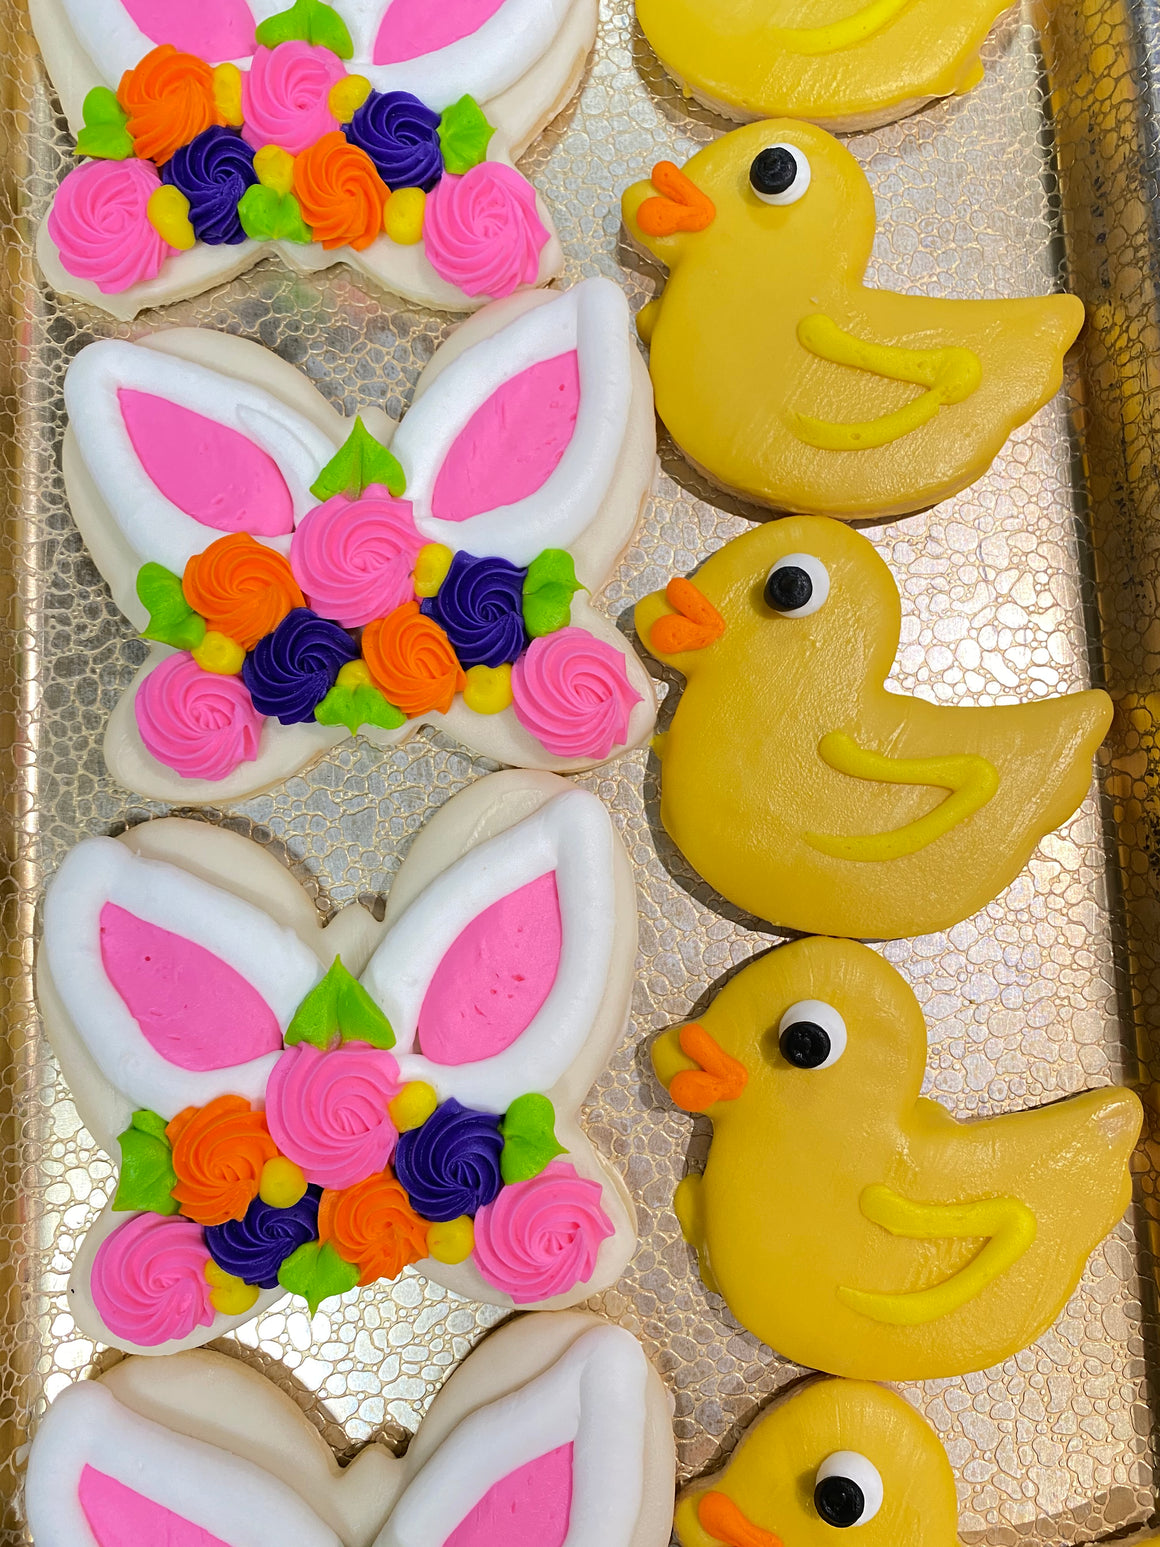 Garden Bunny or Chick Decorated Cookie